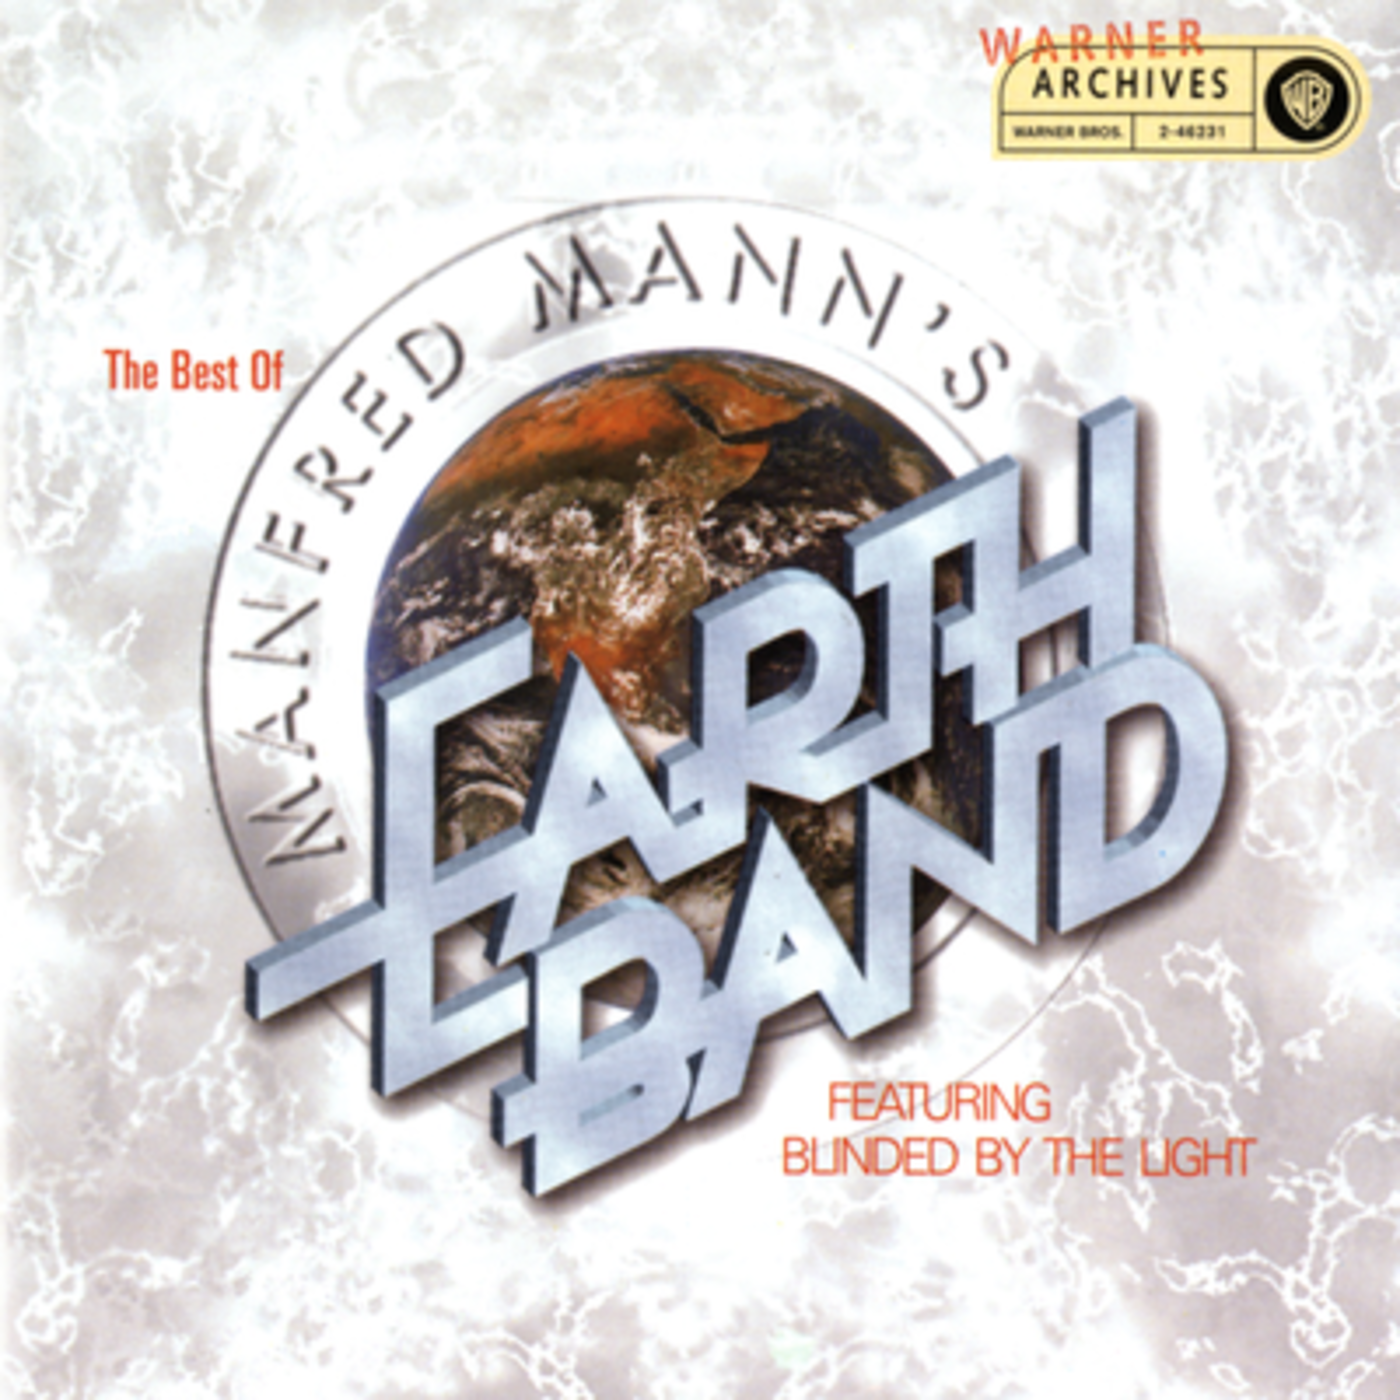 The Best Of Manfred Mann's Earth Band